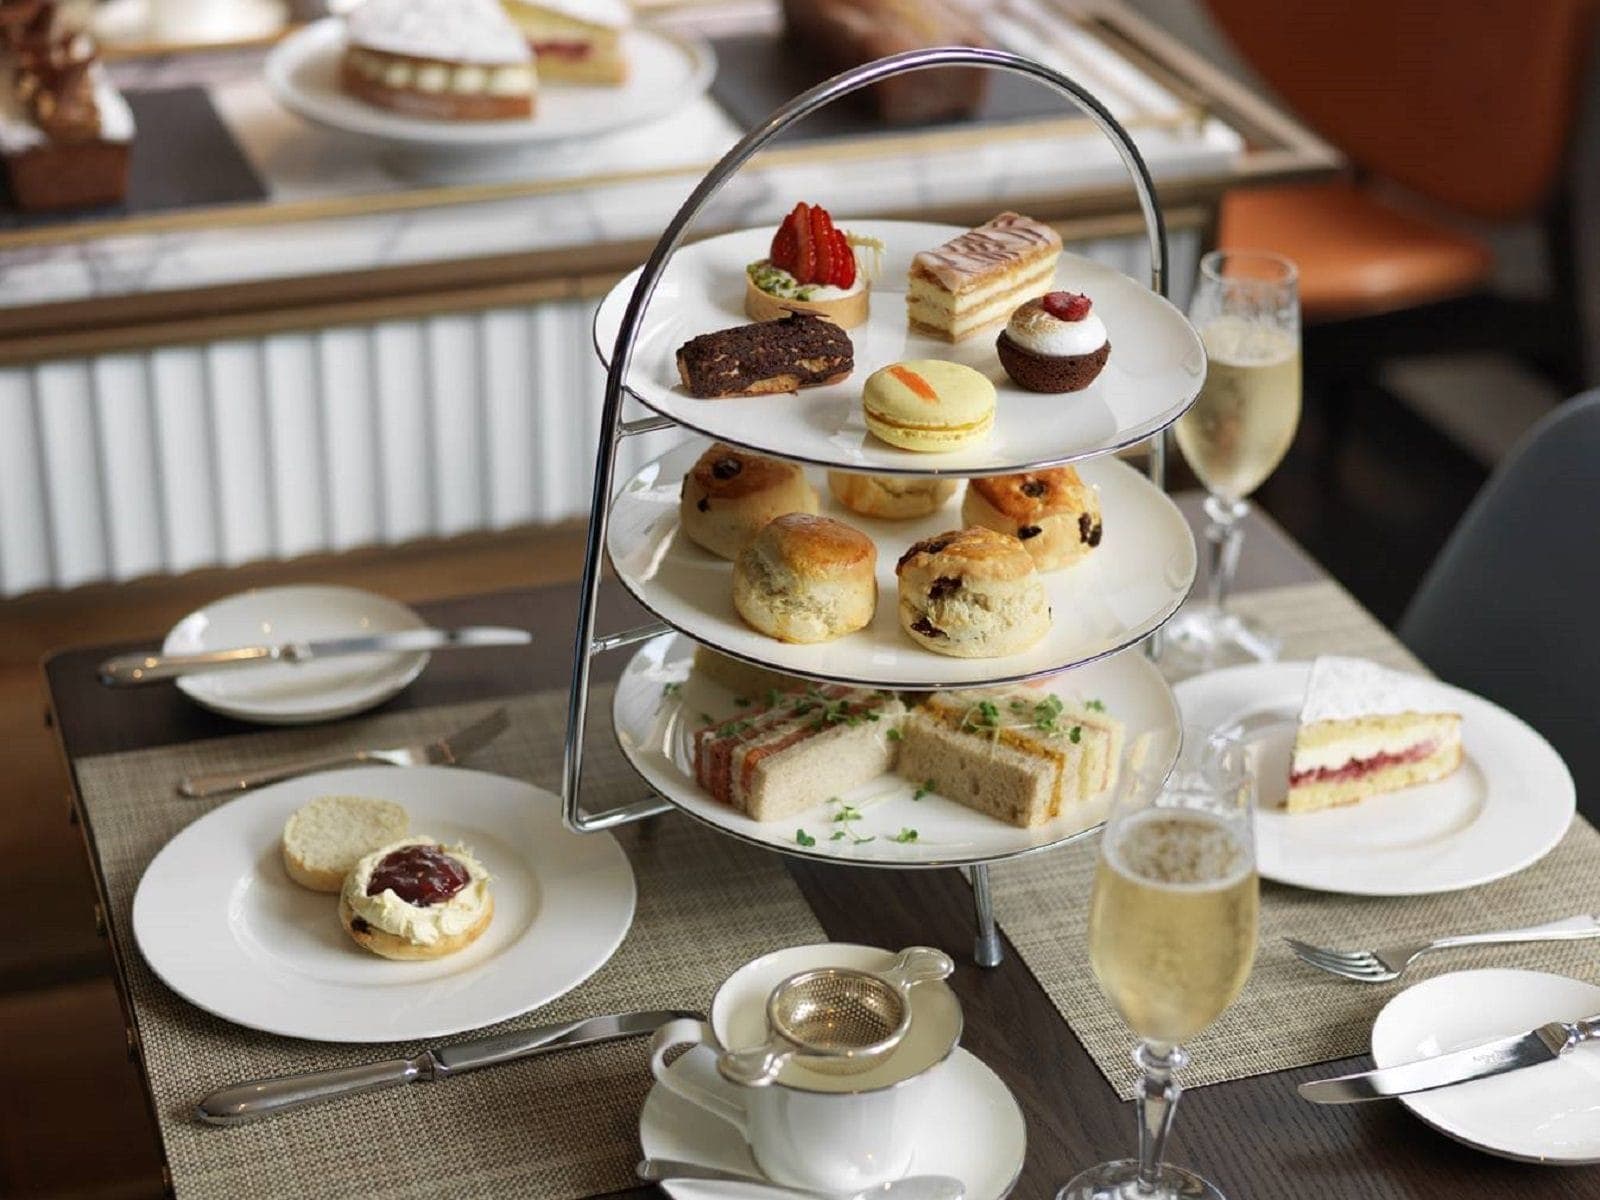 Afternoon Tea at The Athenaeum, Mayfair